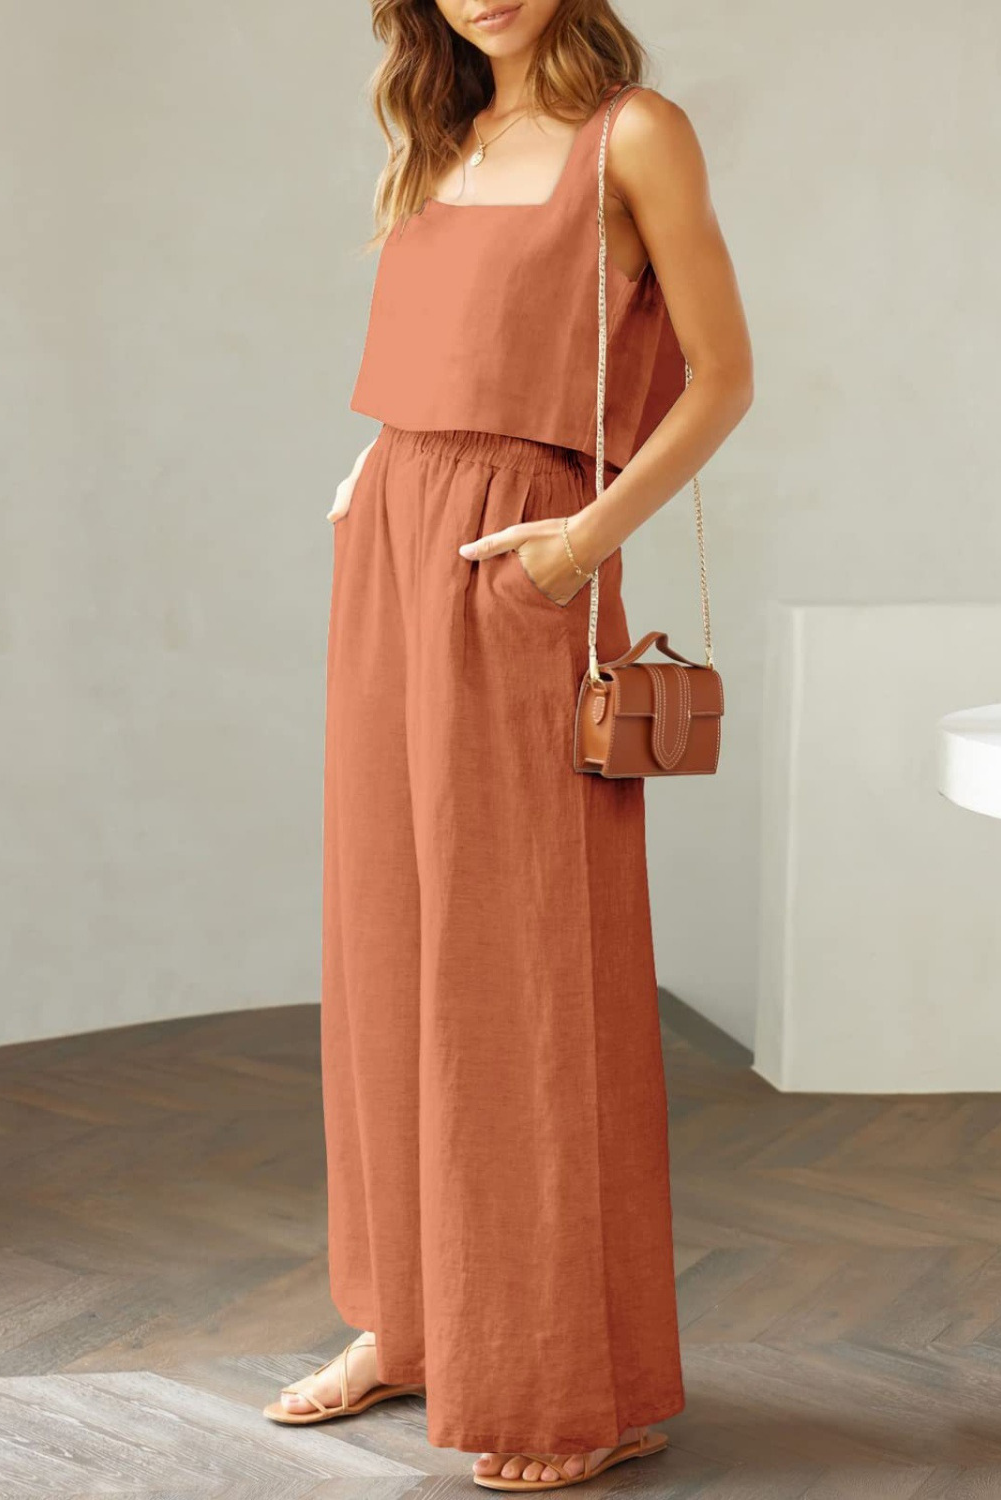 Square Me Top and Wide Leg Pants Set